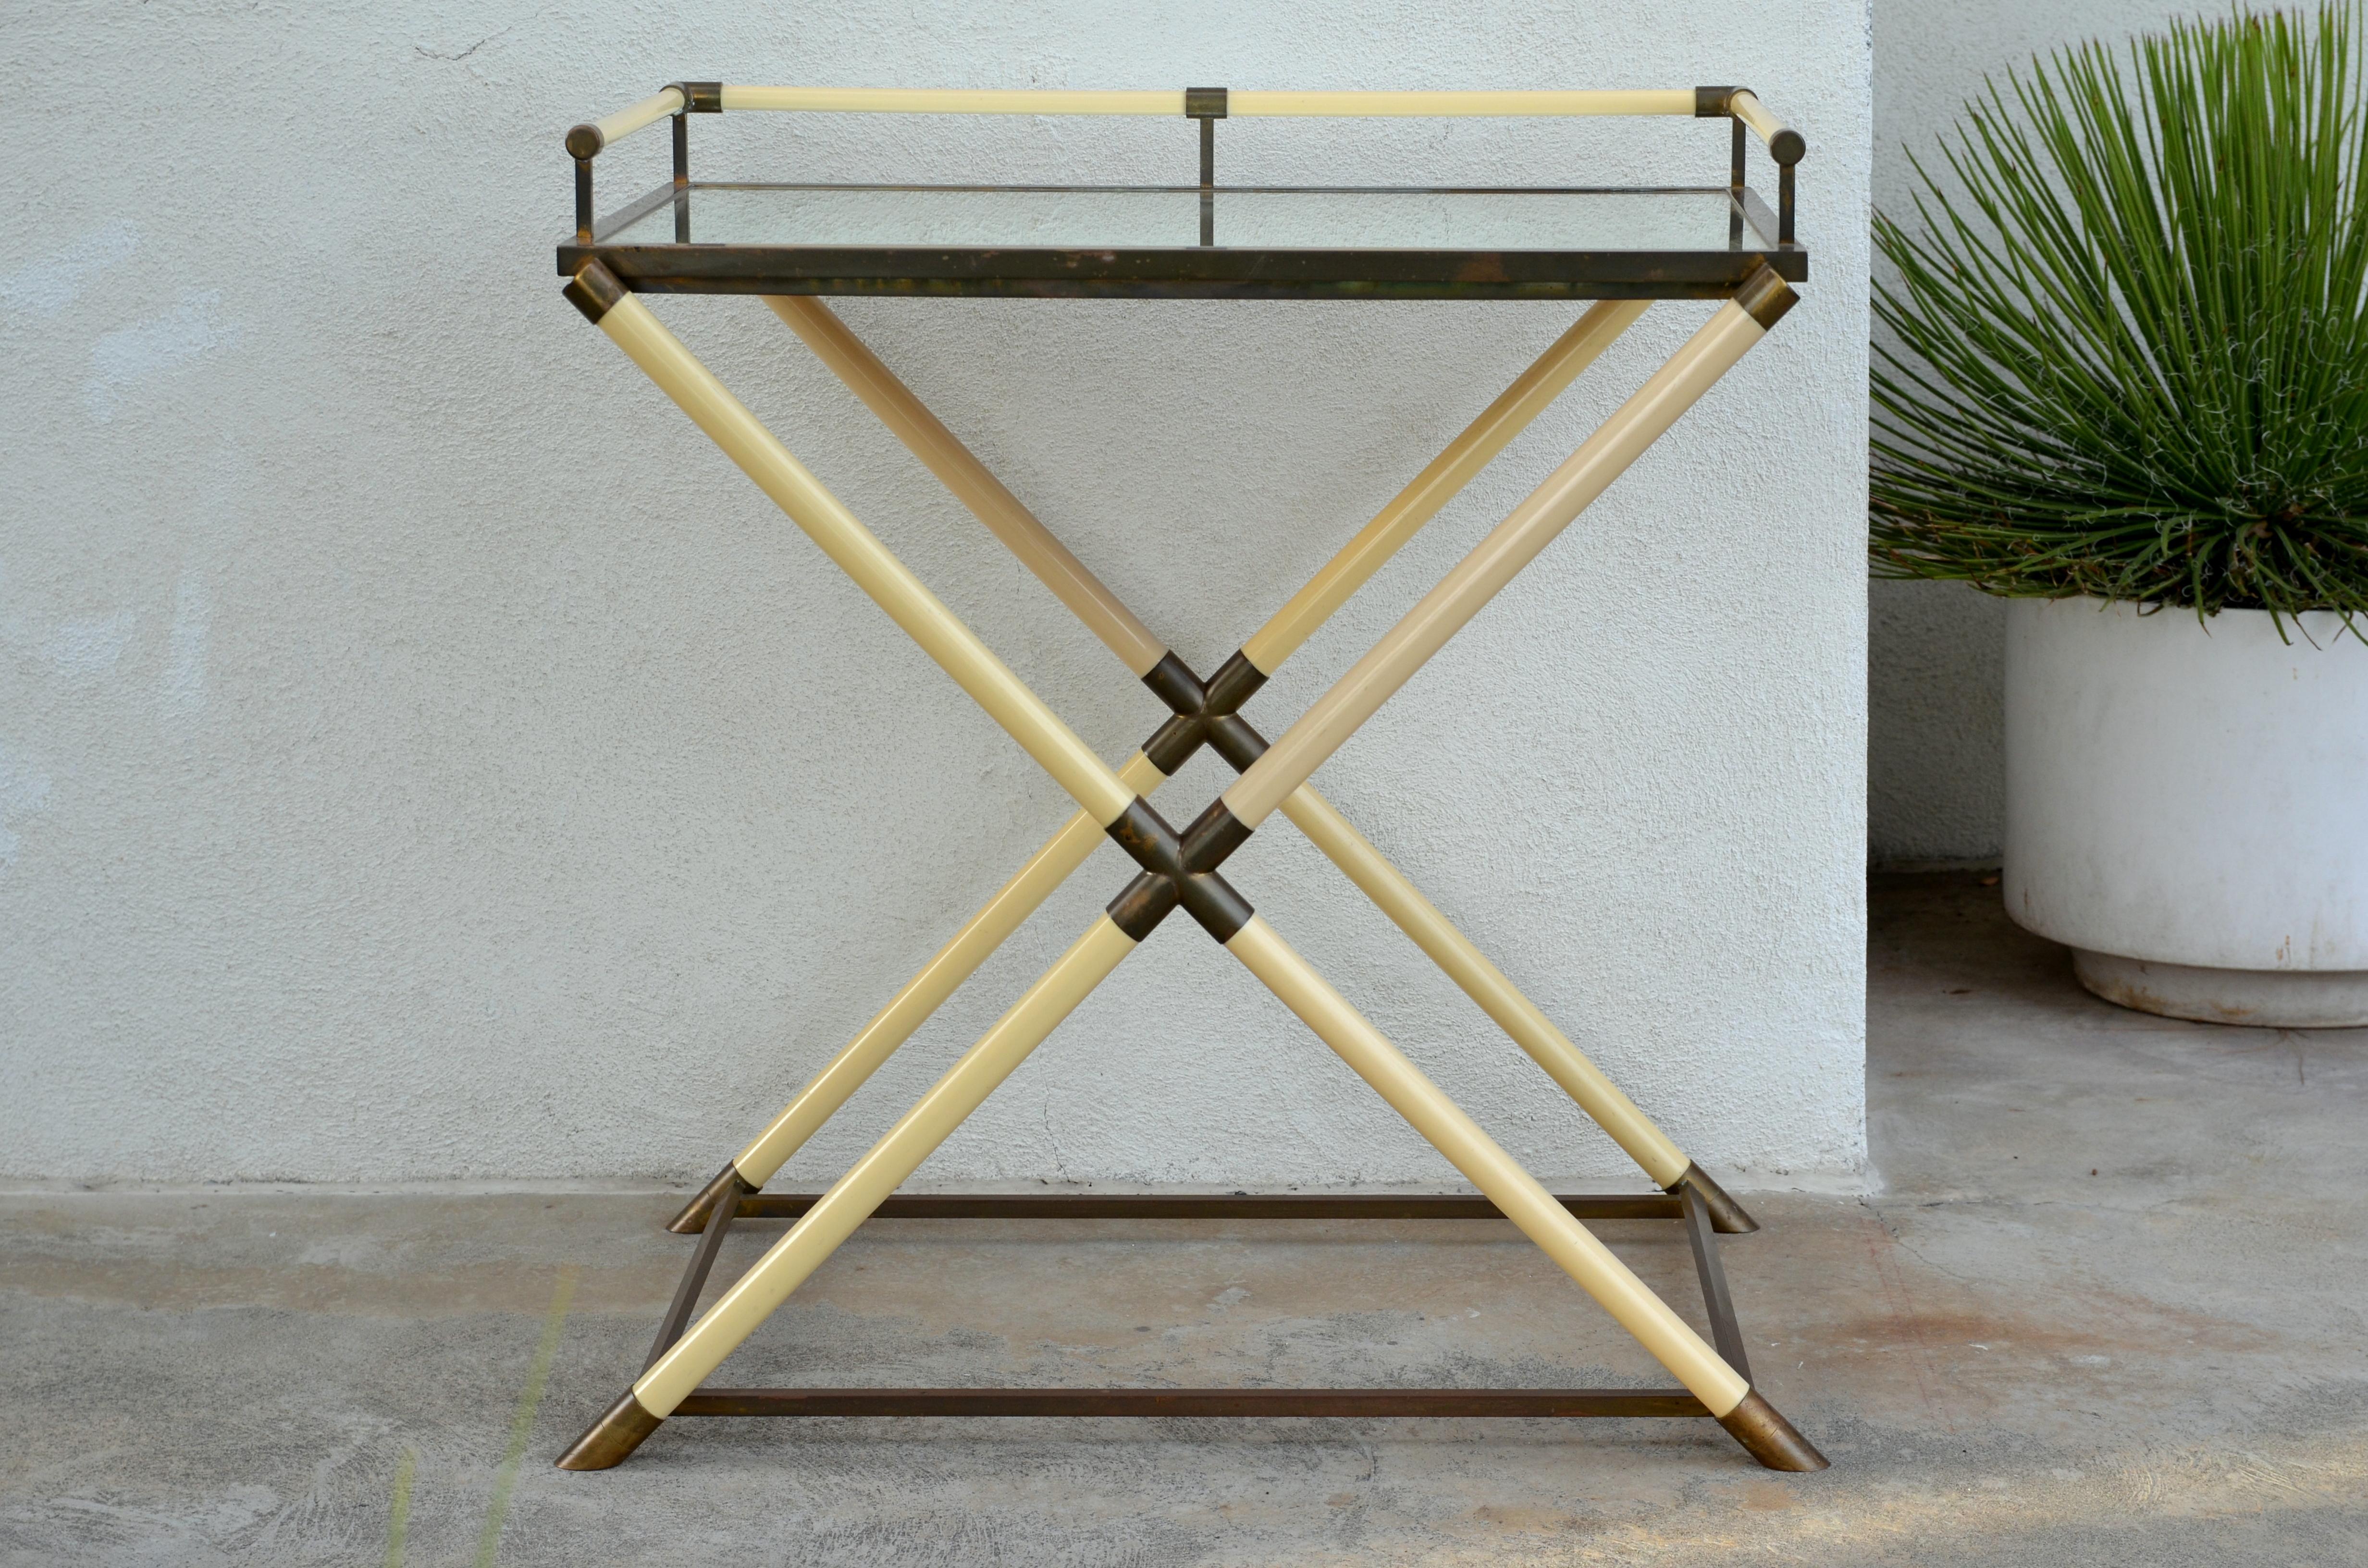 Chic mirrored and patinated brass bar cart by Maison Jansen, Paris. Attractive X stretcher design with removable tray for serving. Also great as a console.

The tray is 32 in. from the floor.